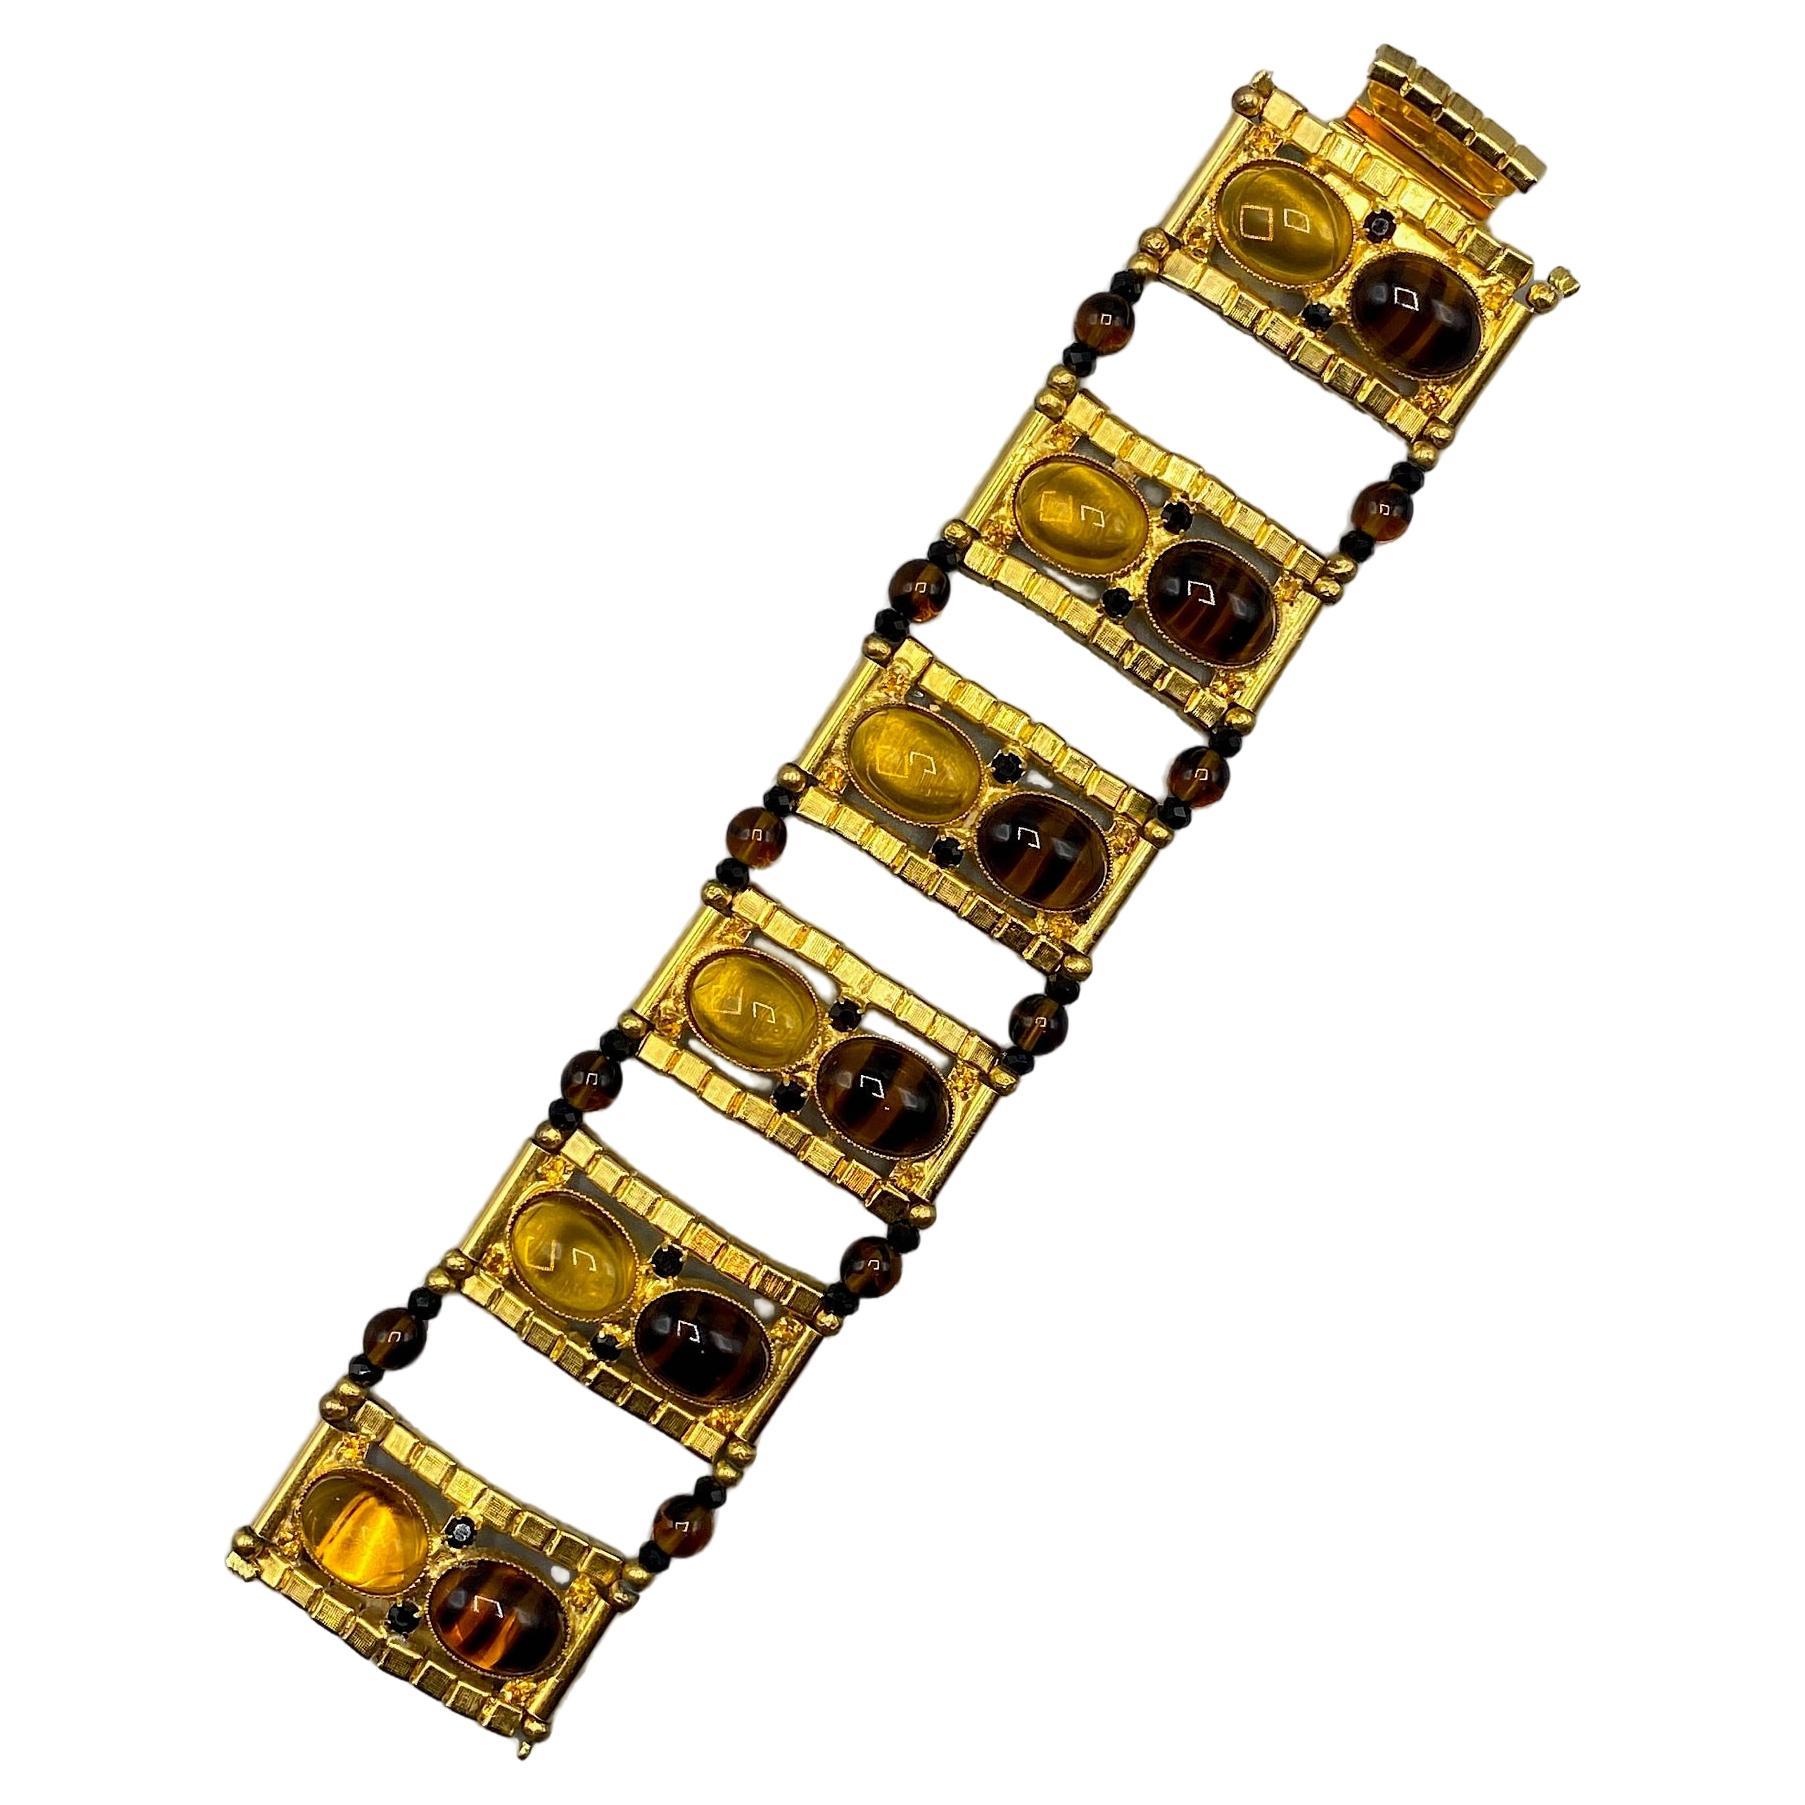 A truly wonderful wide bracelet, circa 1974, by Avant-garde fashion jewelry designer William DeLillo of NYC. The bracelet is in the Egyptian revival style popular in the early 1970s. It is comprised of 6 rectangular and lightly domed .75 inch wide